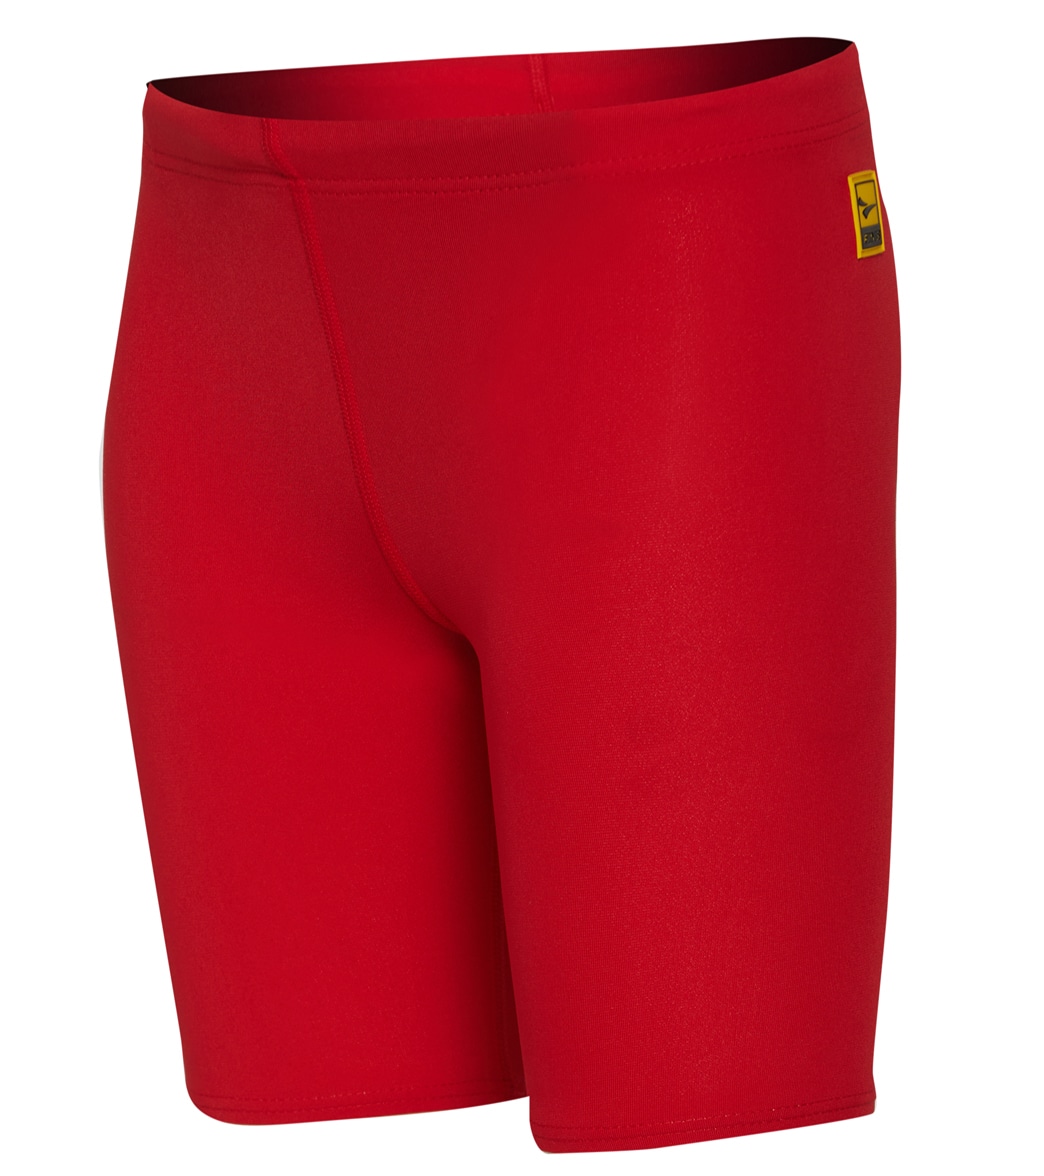 Finis Boys' Solid Jammer Swimsuit - Red 18 - Swimoutlet.com